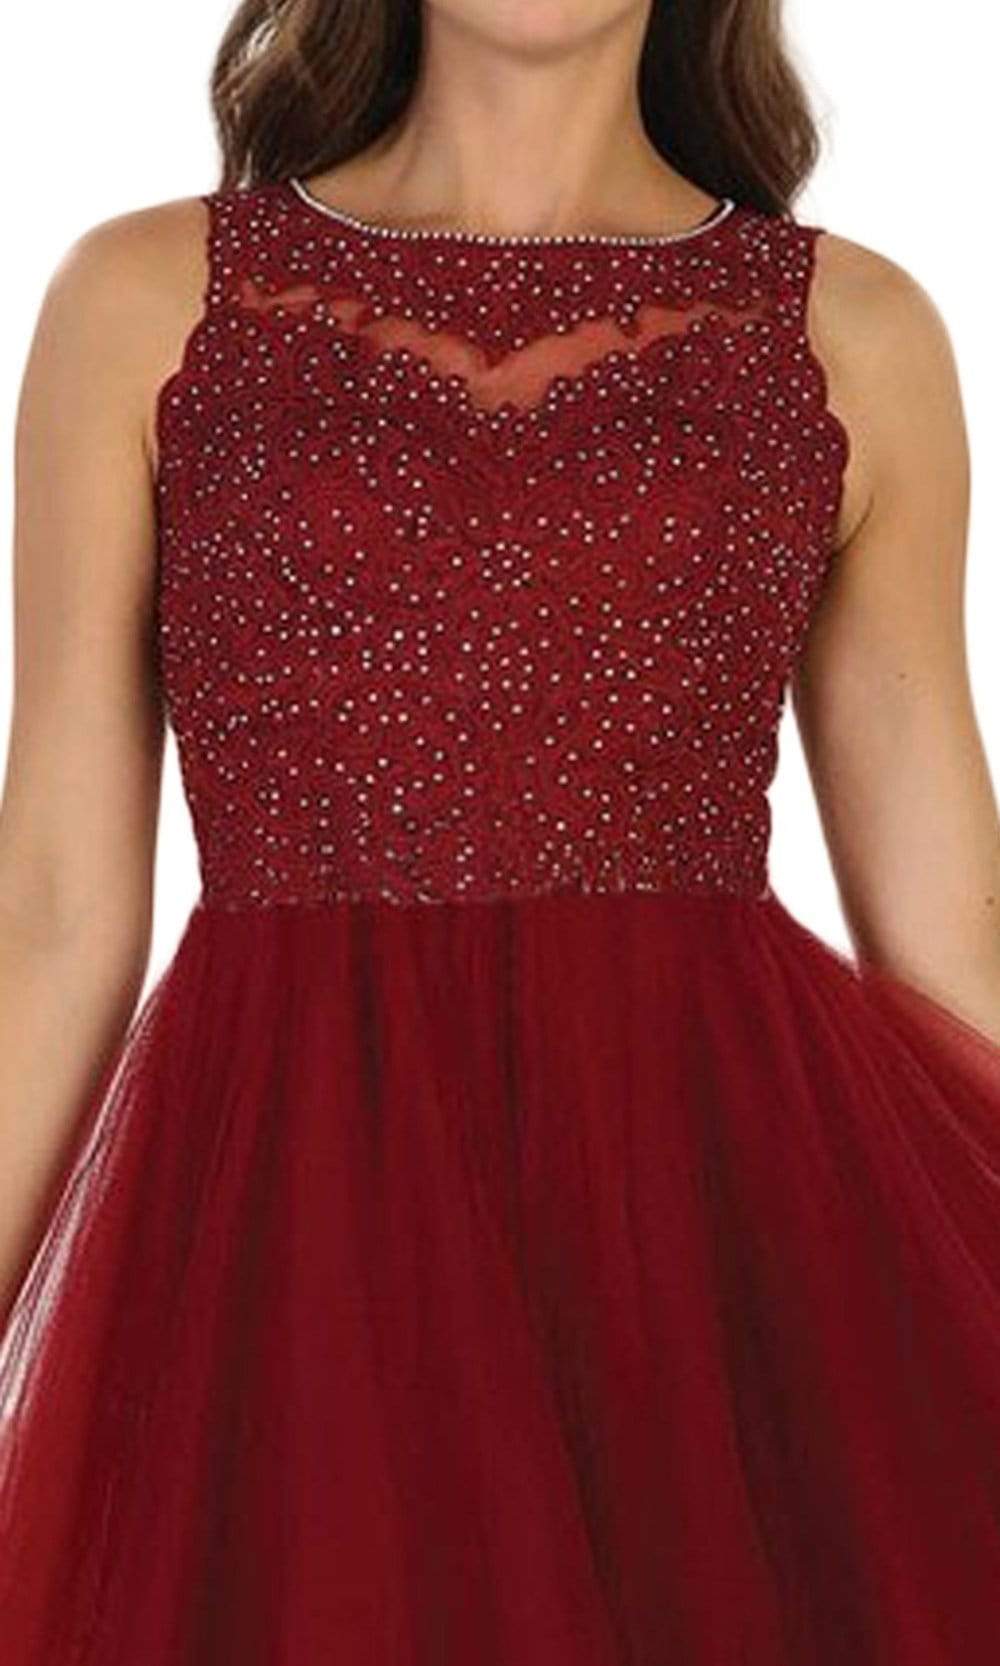 May Queen - Embellished Jewel A-line Homecoming Dress Special Occasion Dress